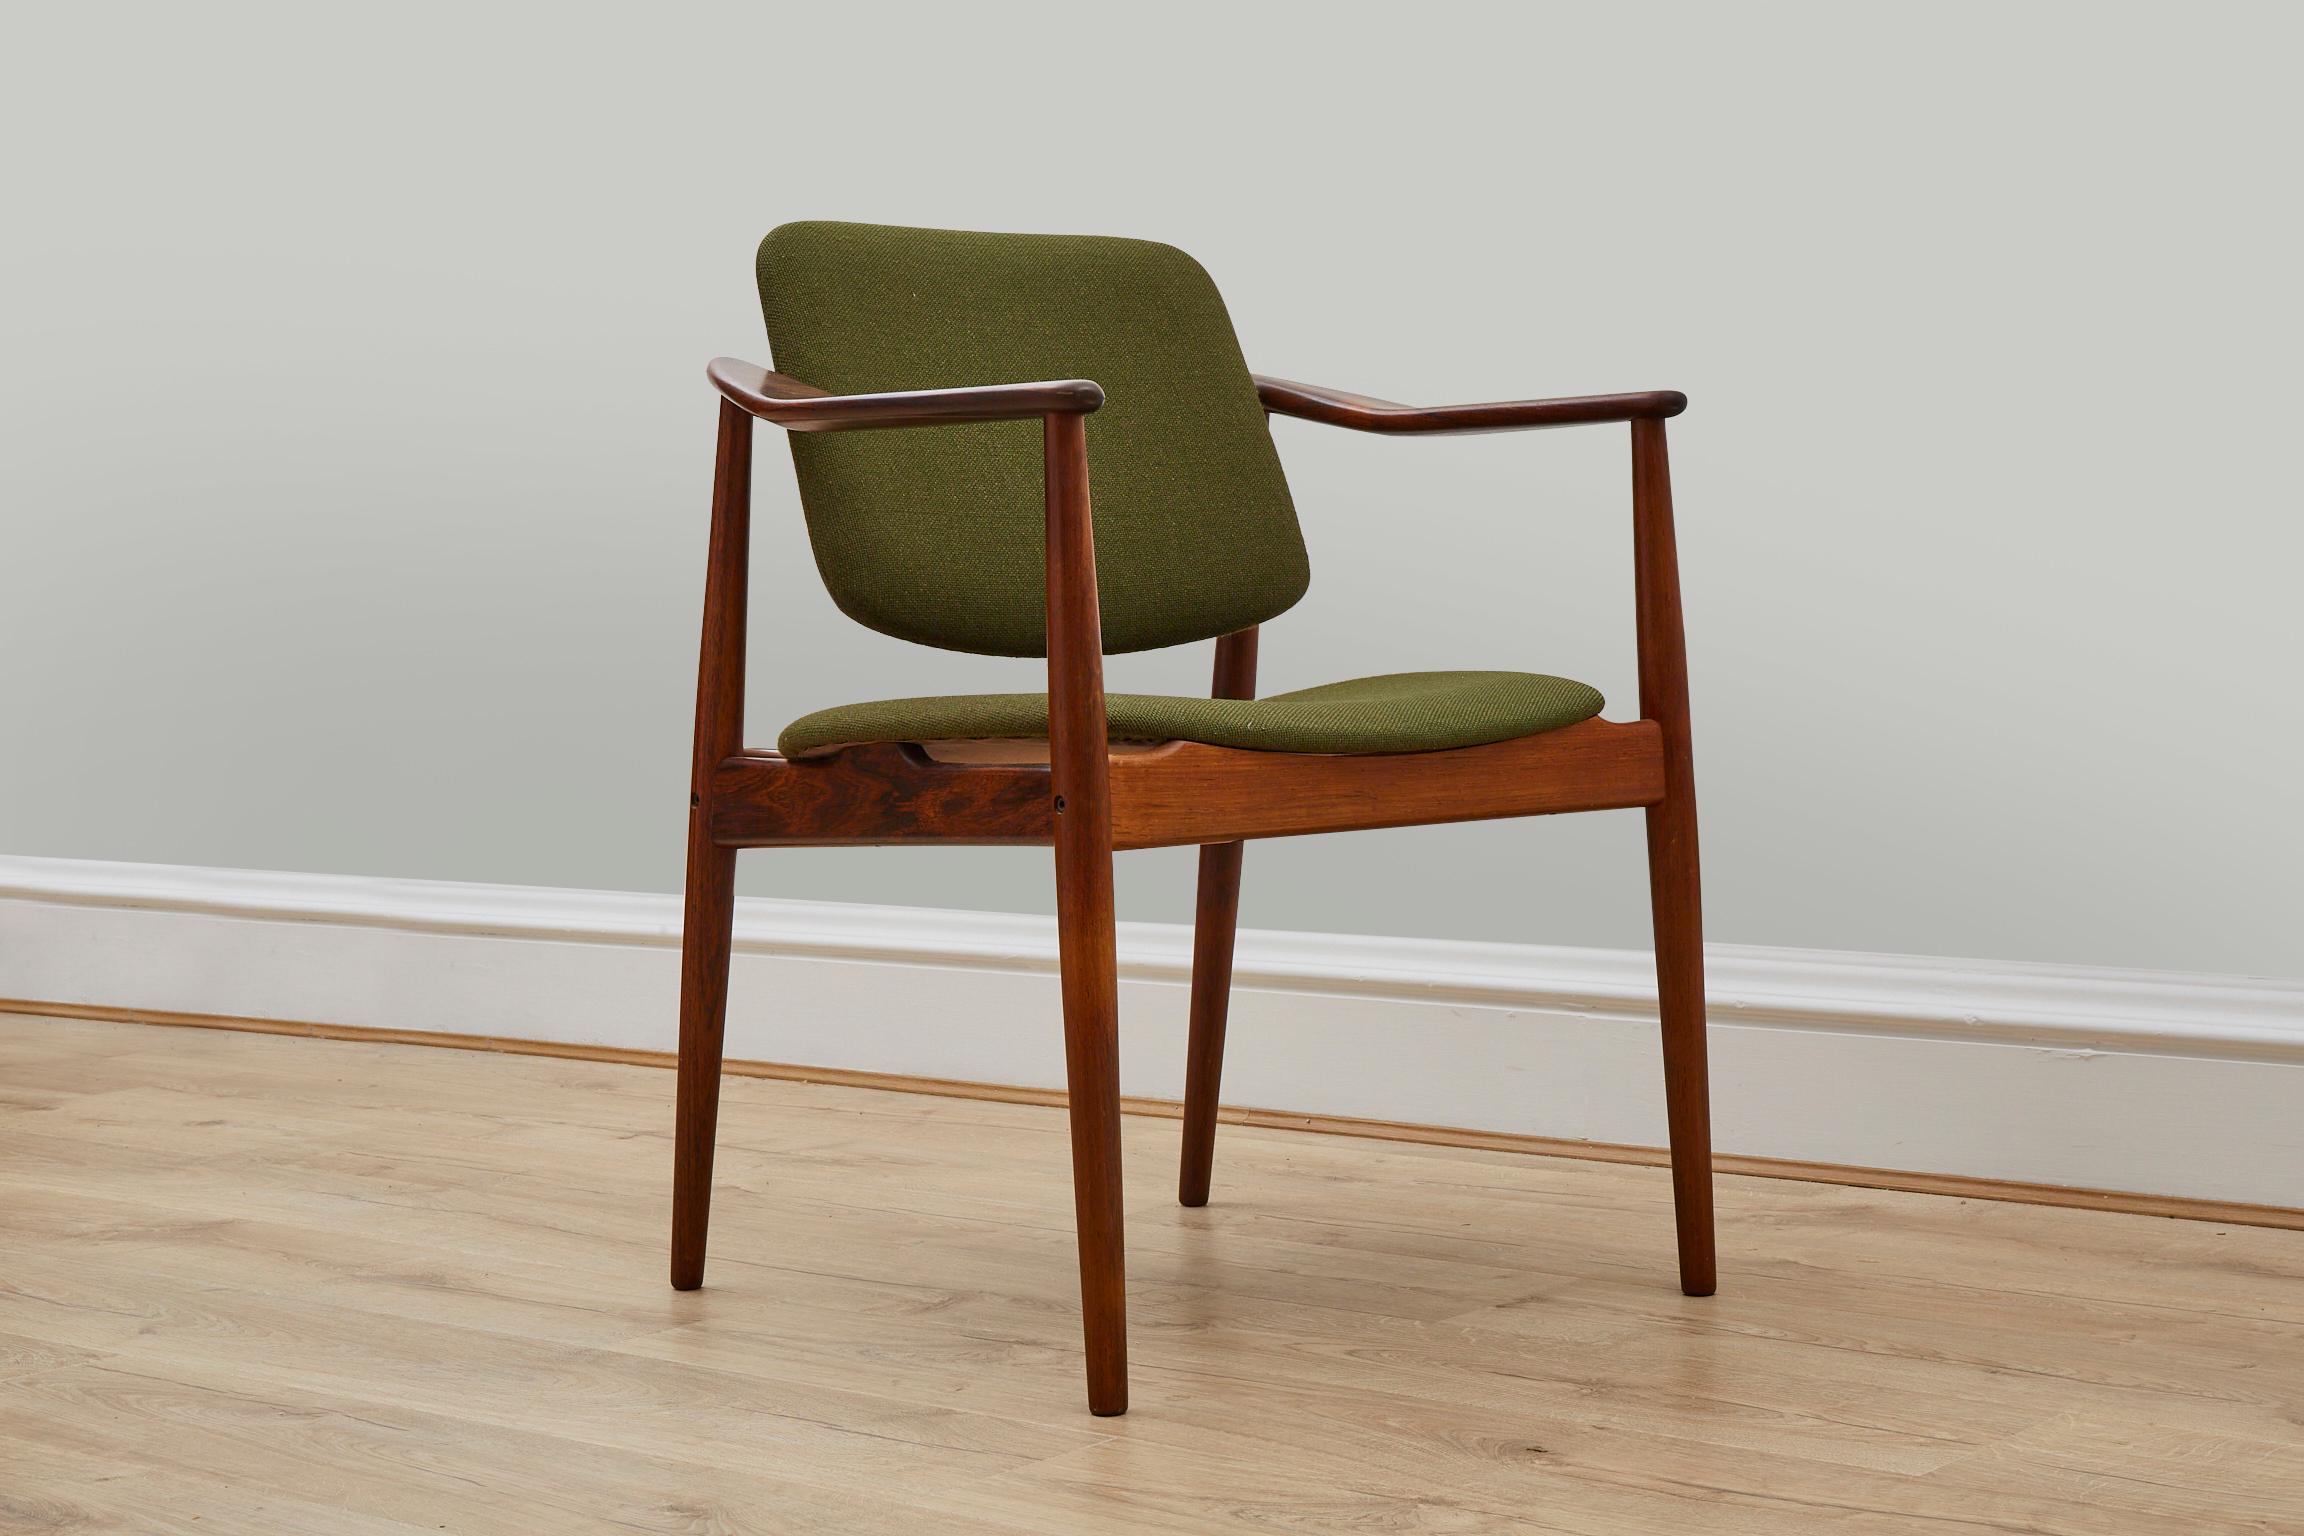 Danish modern rosewood arm chair, designed by Arne Vodder. This elegant chair has a seat, a back that pivots for comfort, and a solid rosewood sculptural frame. It could be used as a desk, dining, or side chair.